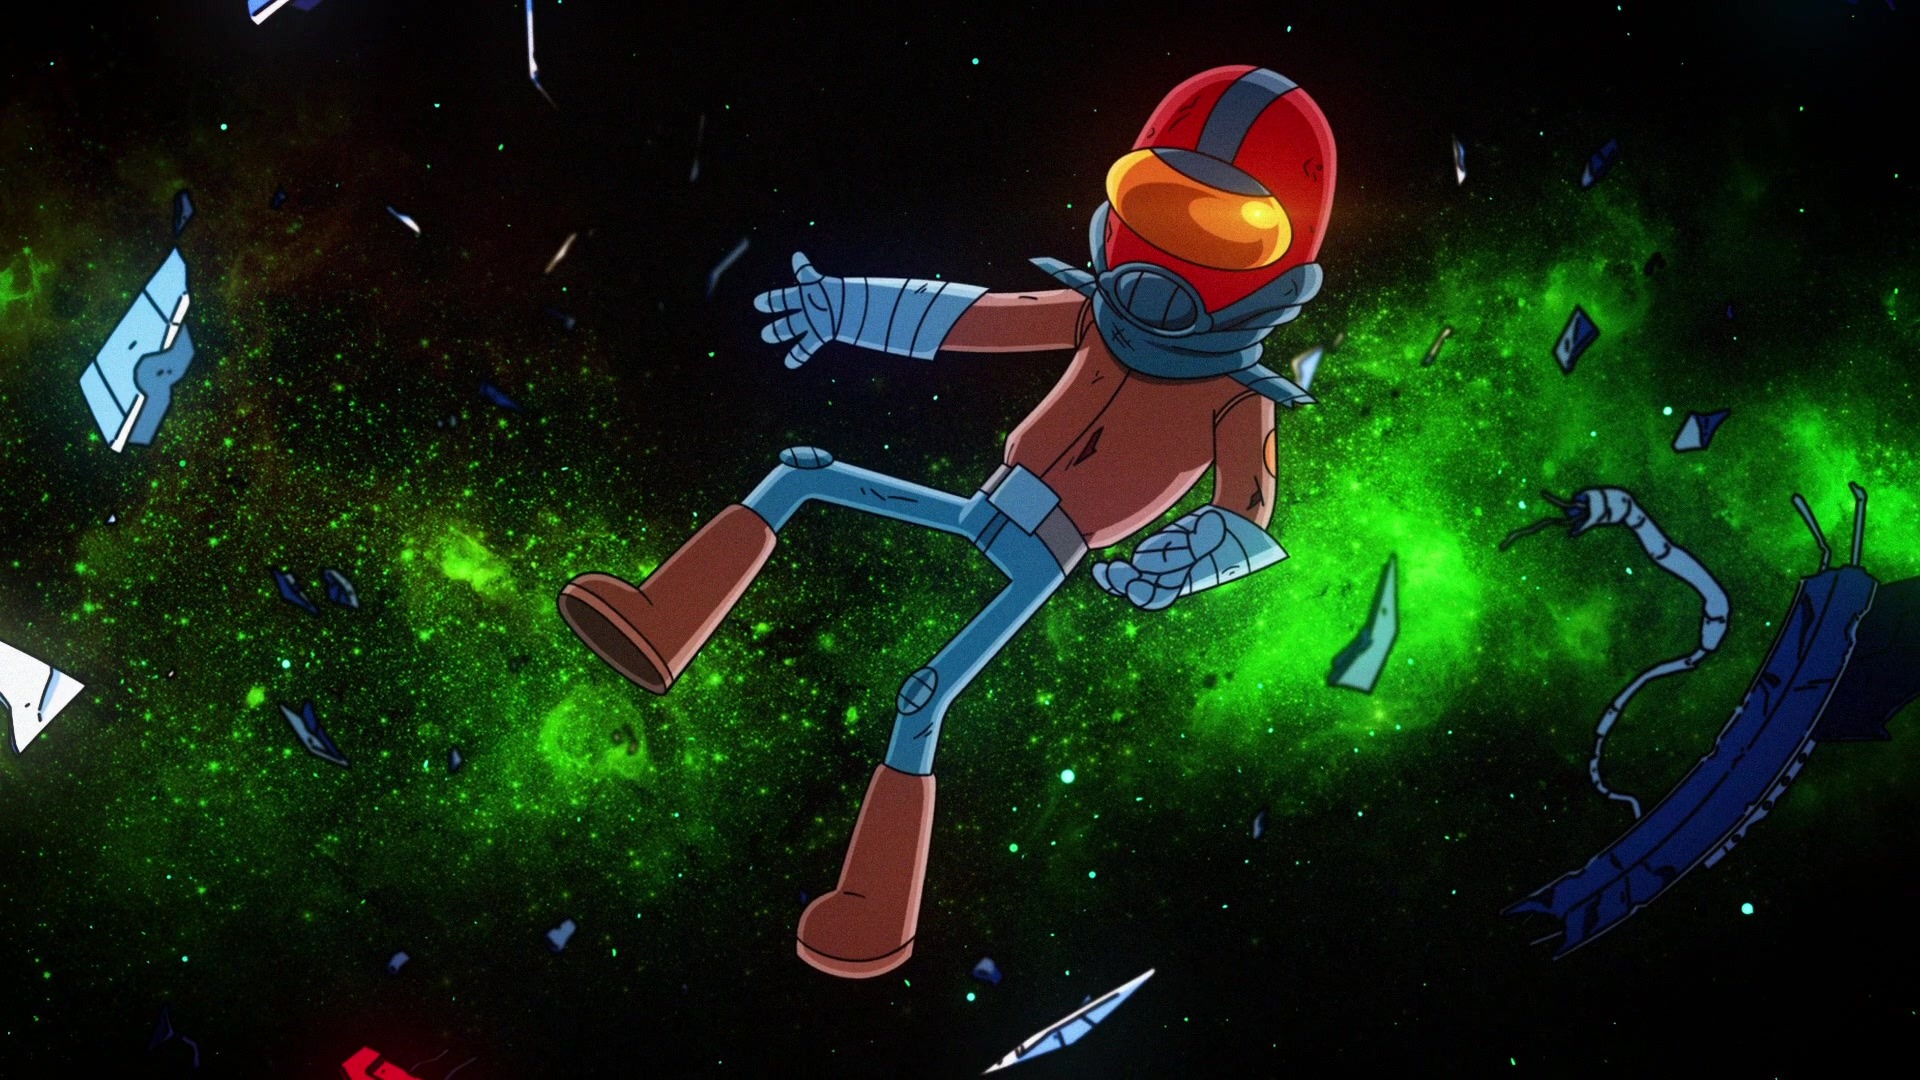 Download Space Boots Gary Goodspeed Tv Show Final Space Hd Wallpaper